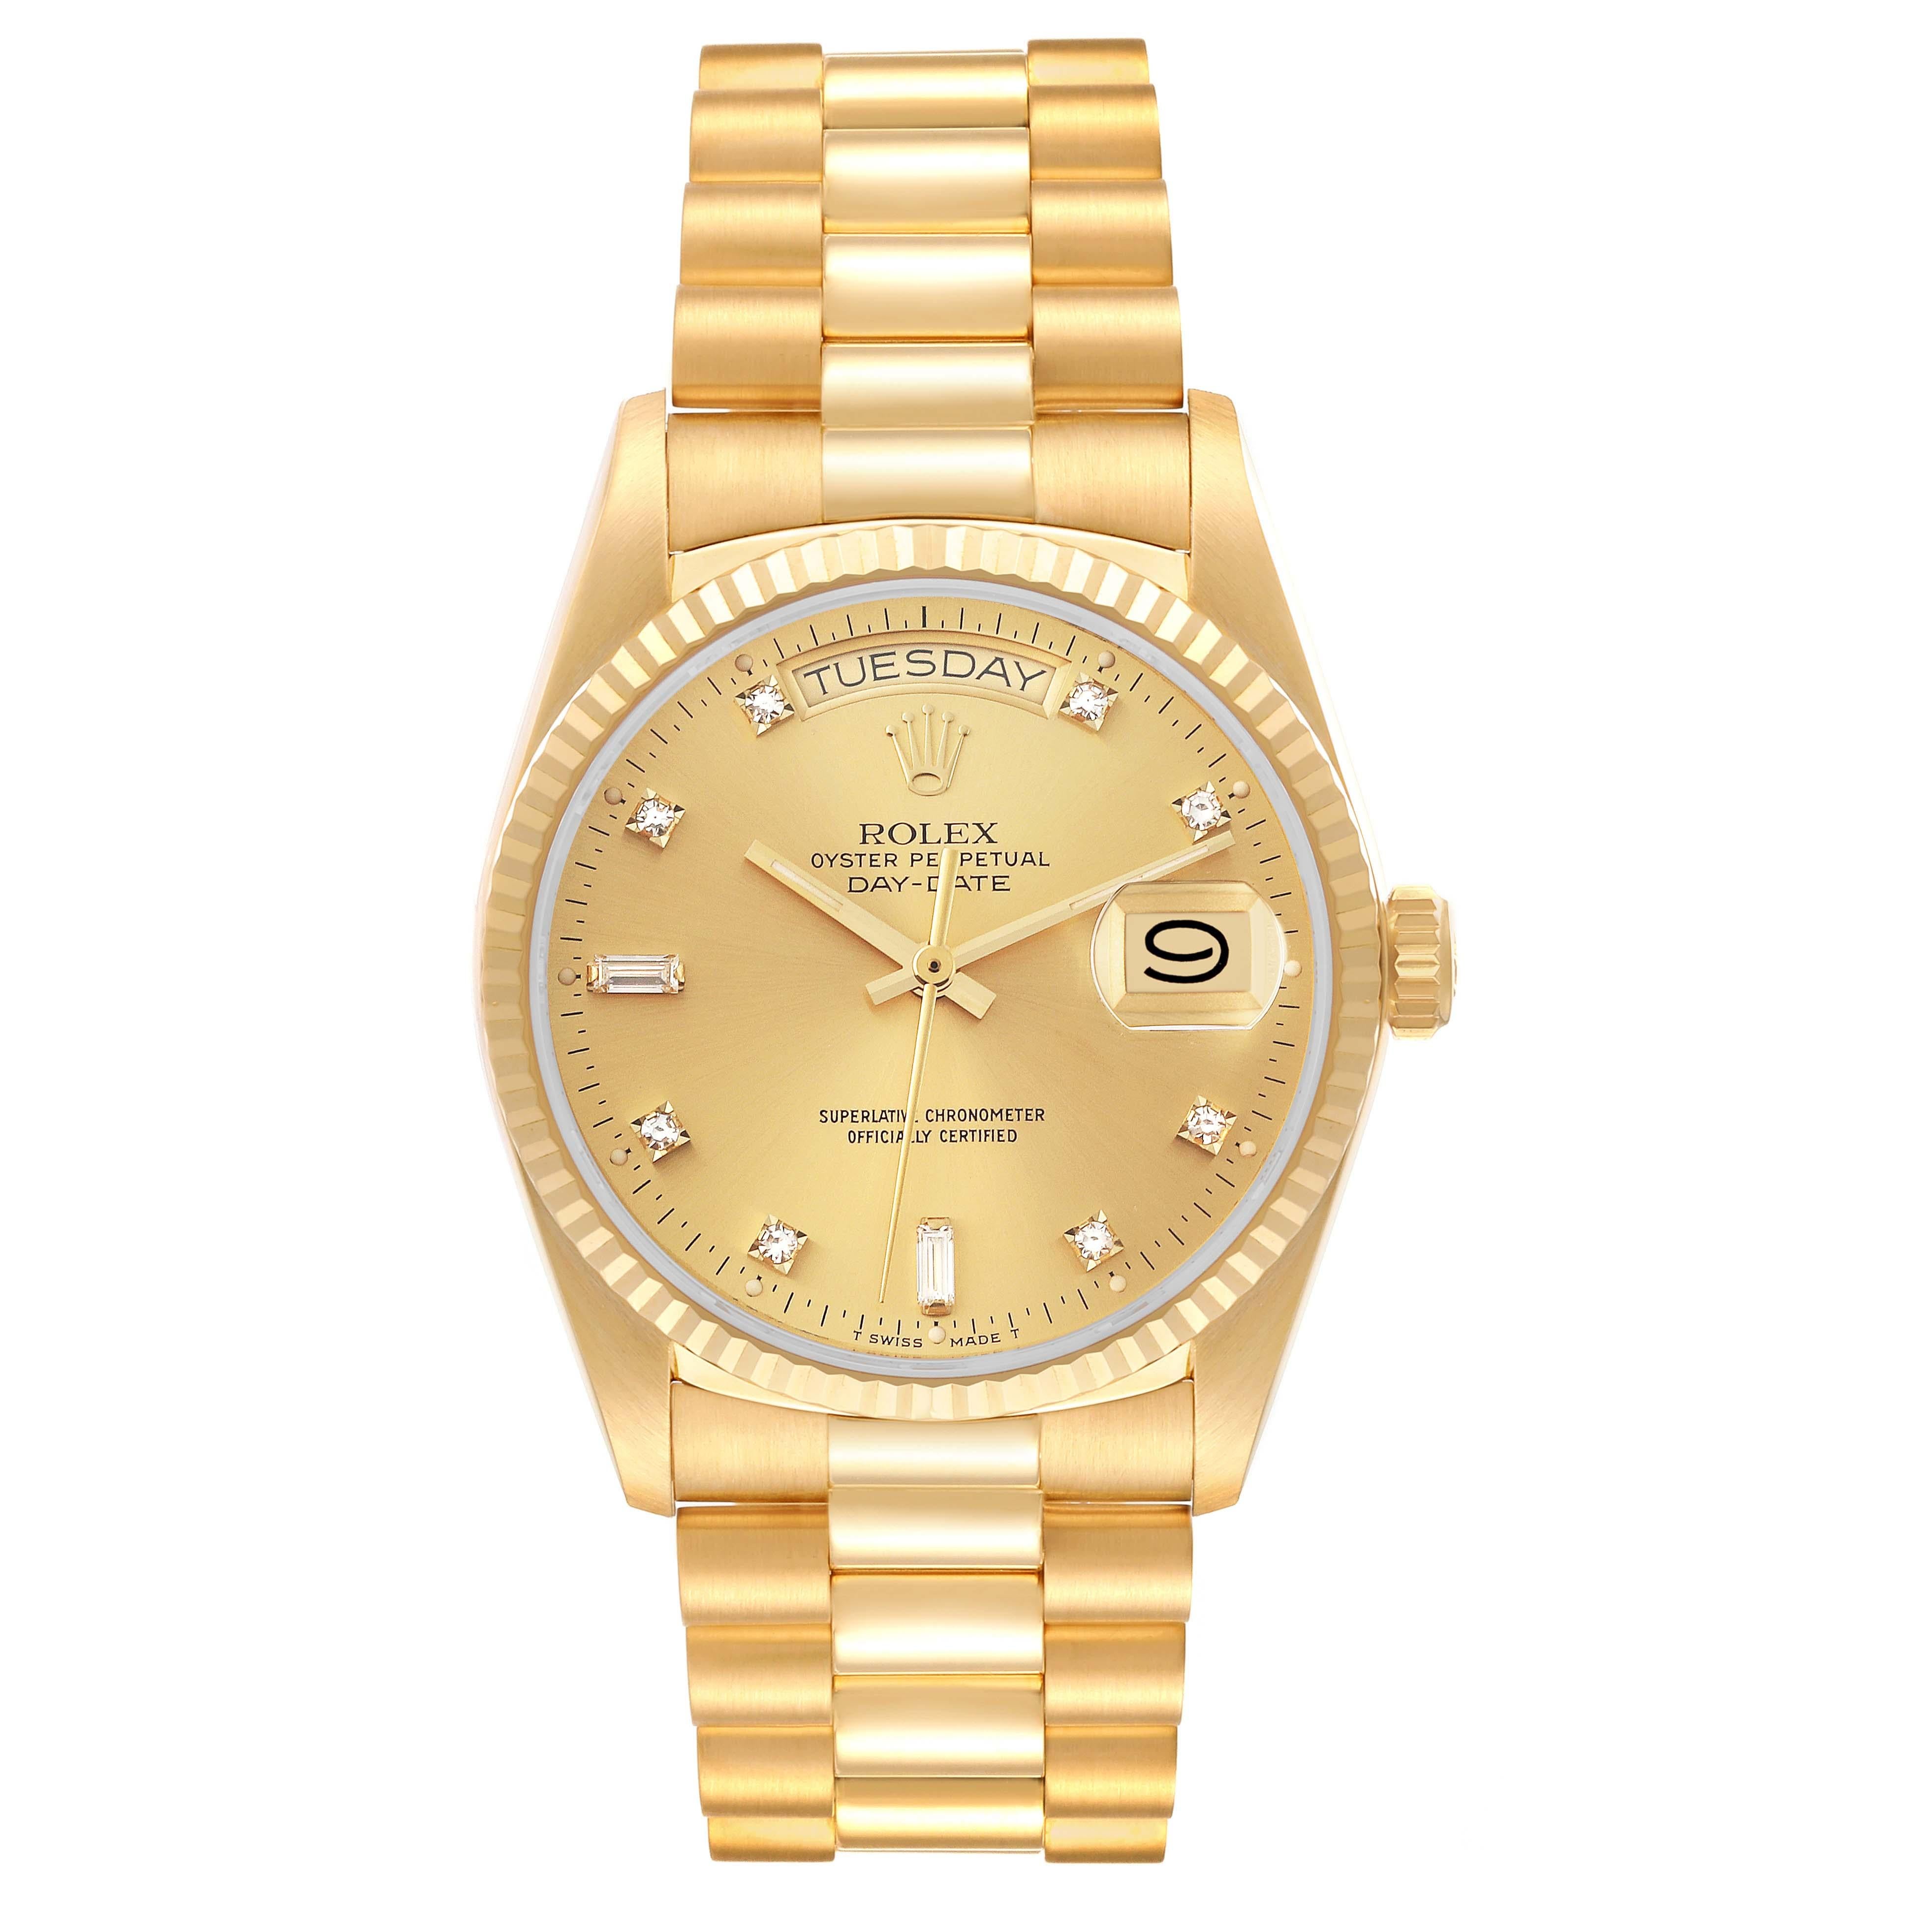 Rolex President Day-Date Yellow Gold Diamond Dial Mens Watch 18038 In Good Condition For Sale In Atlanta, GA